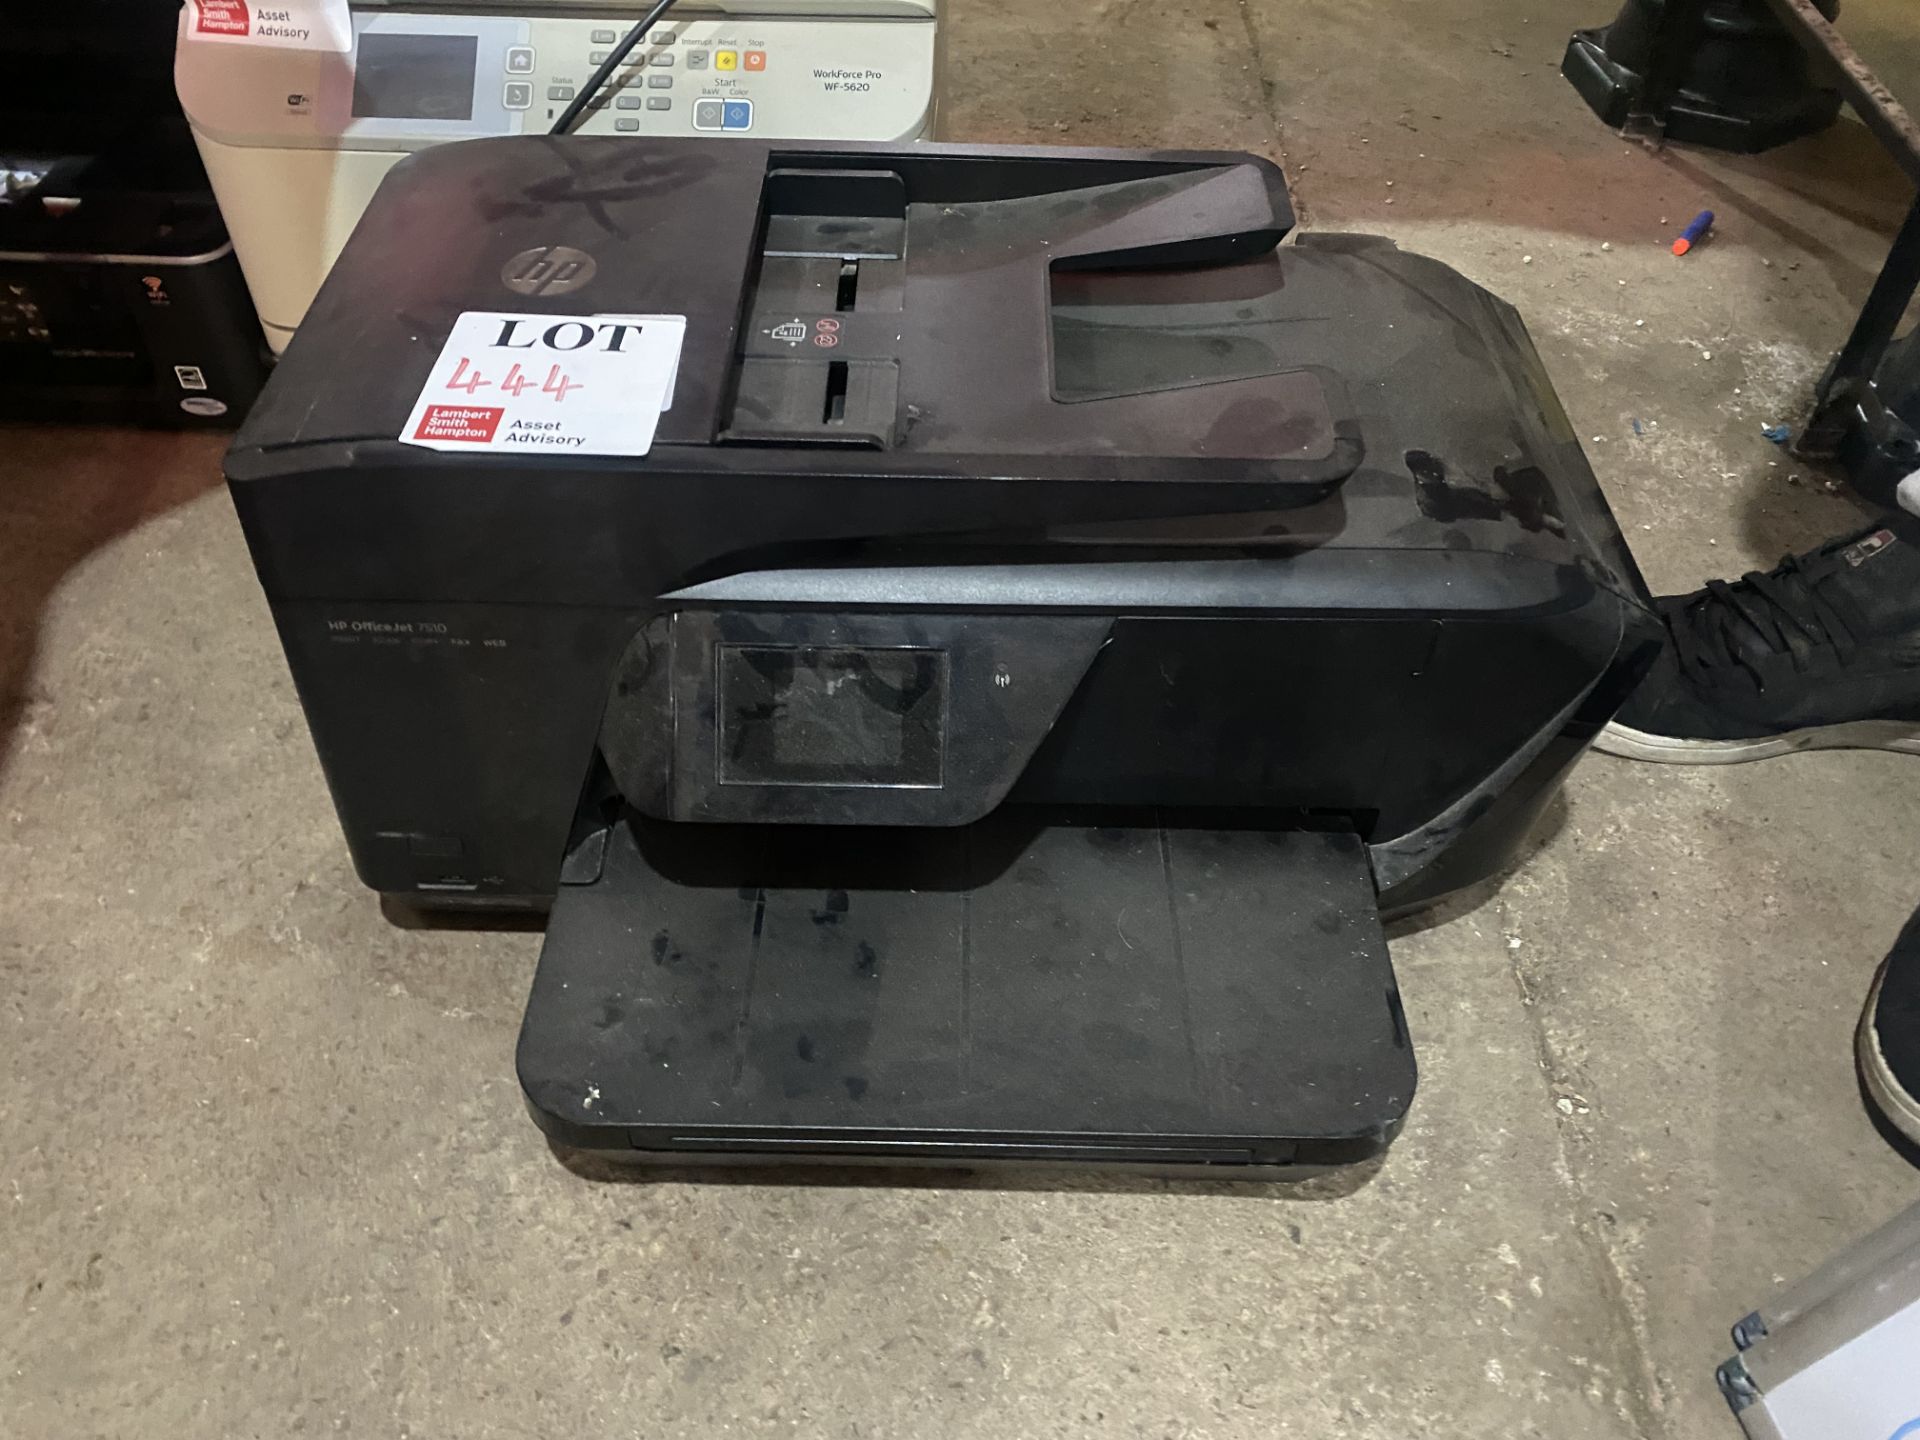 HP Officejet 7510 printer/laminator (working condition unknown)